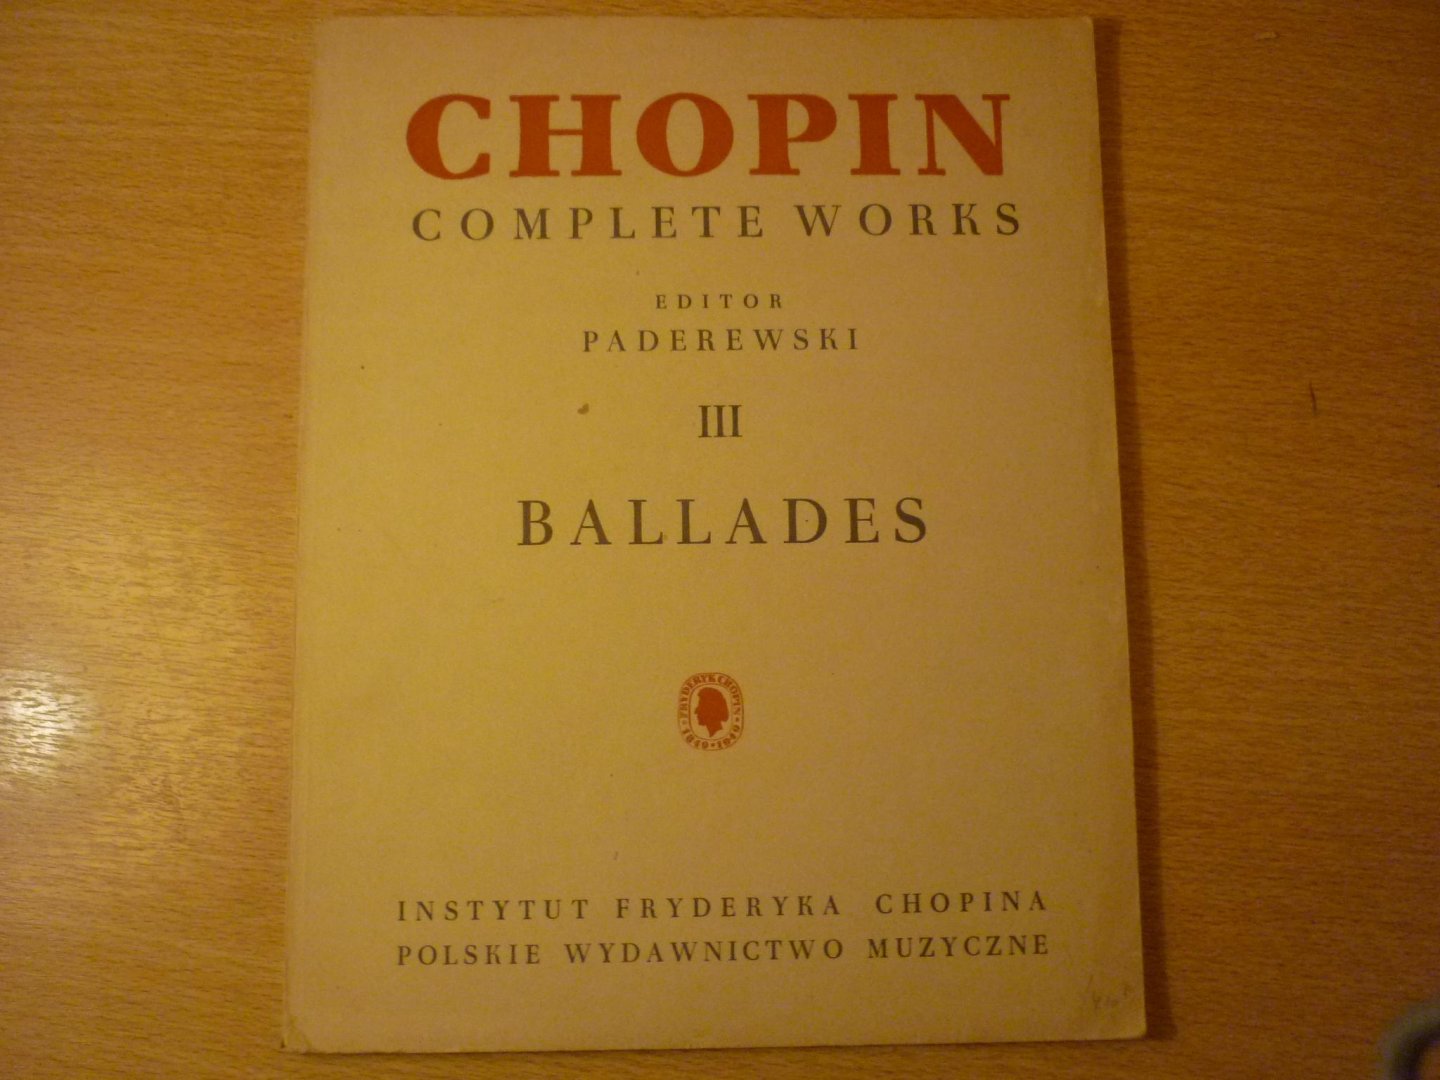 Chopin; Fr. (1810 - 1849) - Chopin - complete works III; Ballades for Piano